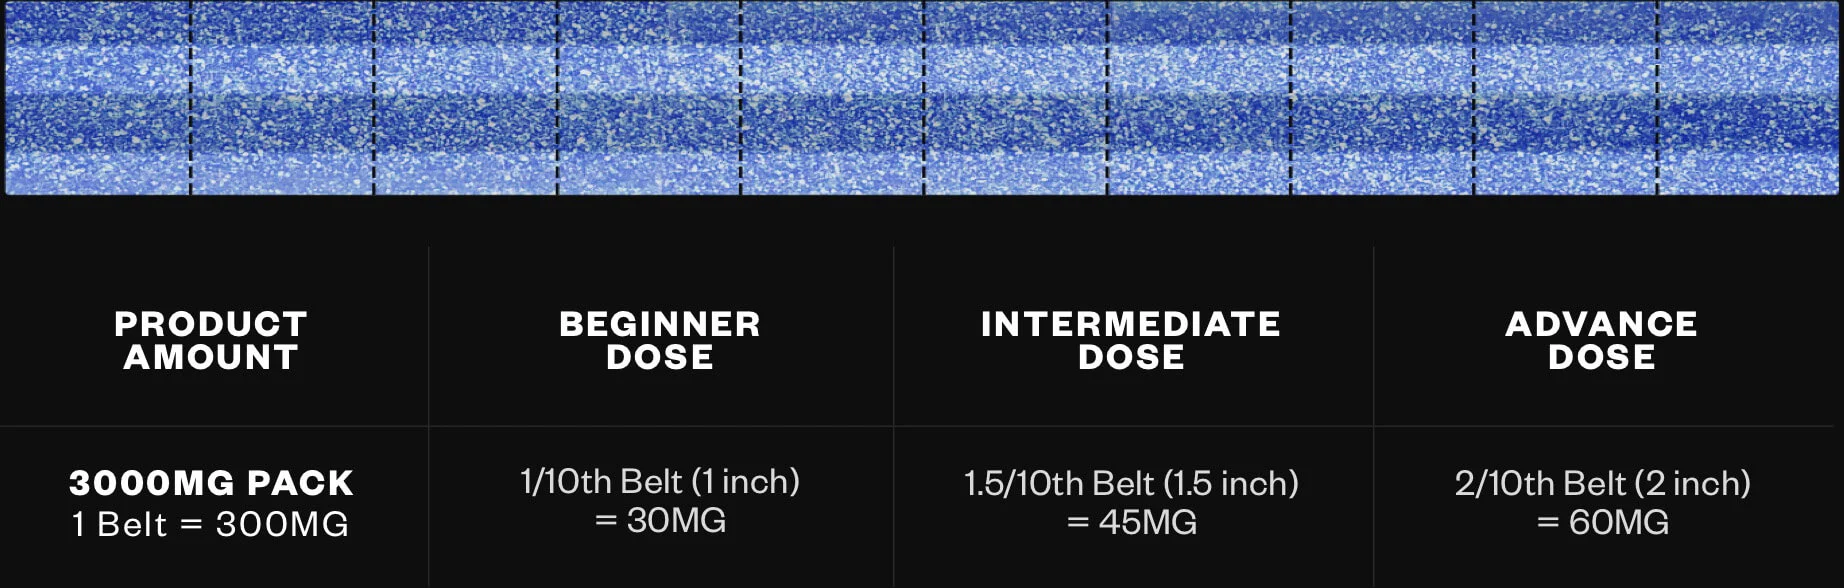 Sour Belt dosage chart. Product amount = 3000mg pack, 1 belt = 300mg. Beginner dose is 1/10th of a belt (1 inch) = 30mg. Intermediate dose is 1.5/10th of a belt (1.5 inch) = 45mg. Advance dose is 2/10th Belt (2 inch) = 60mg.